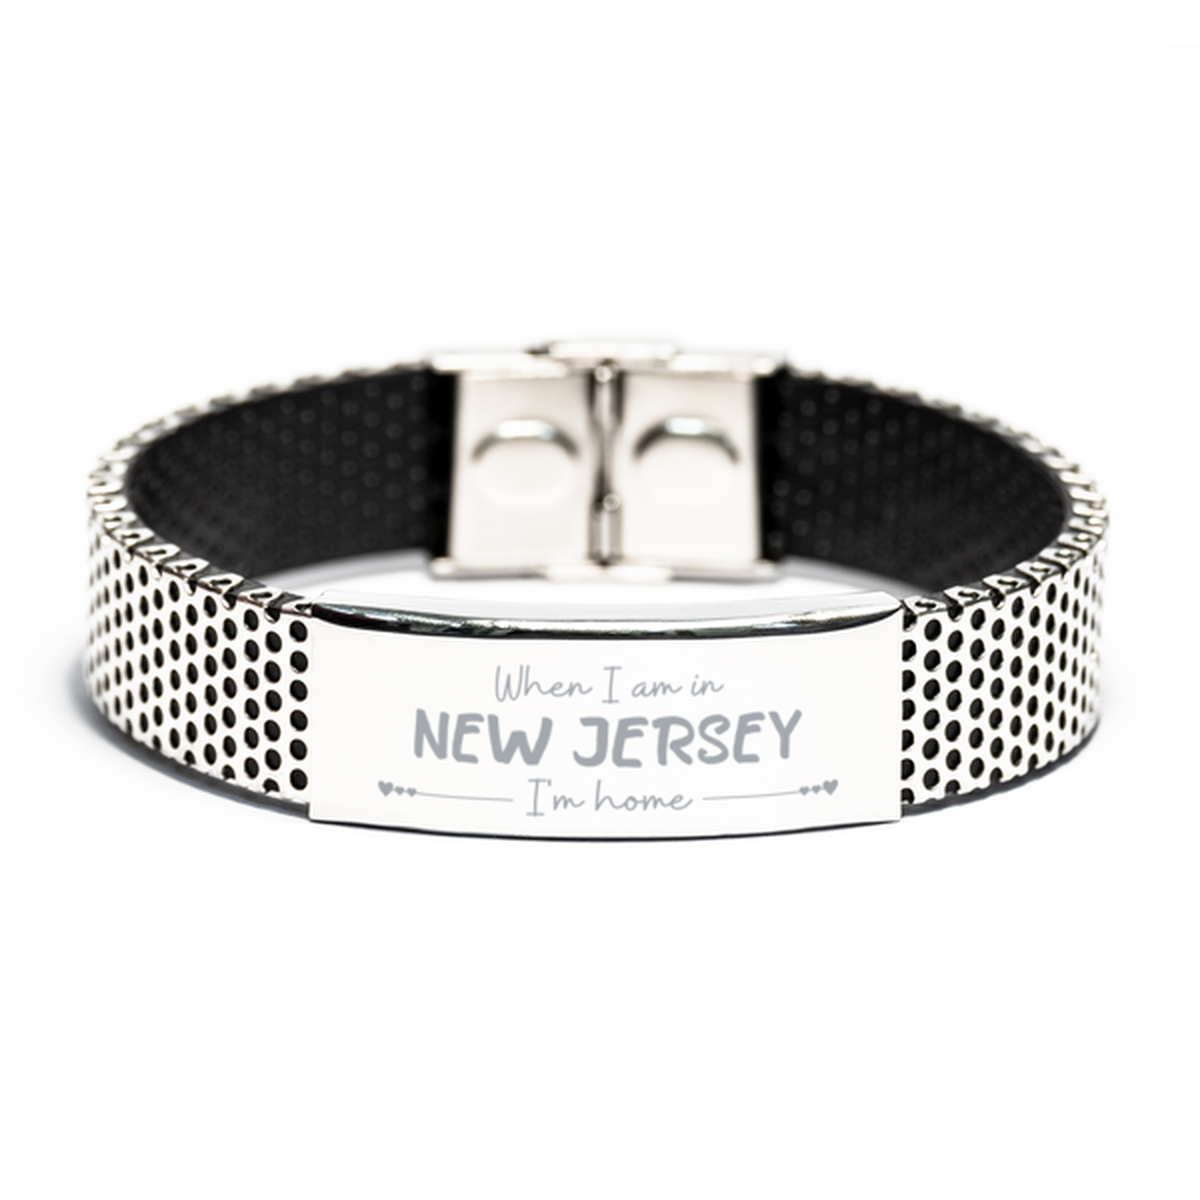 When I am in New Jersey I'm home Stainless Steel Bracelet, Cheap Gifts For New Jersey, State New Jersey Birthday Gifts for Friends Coworker